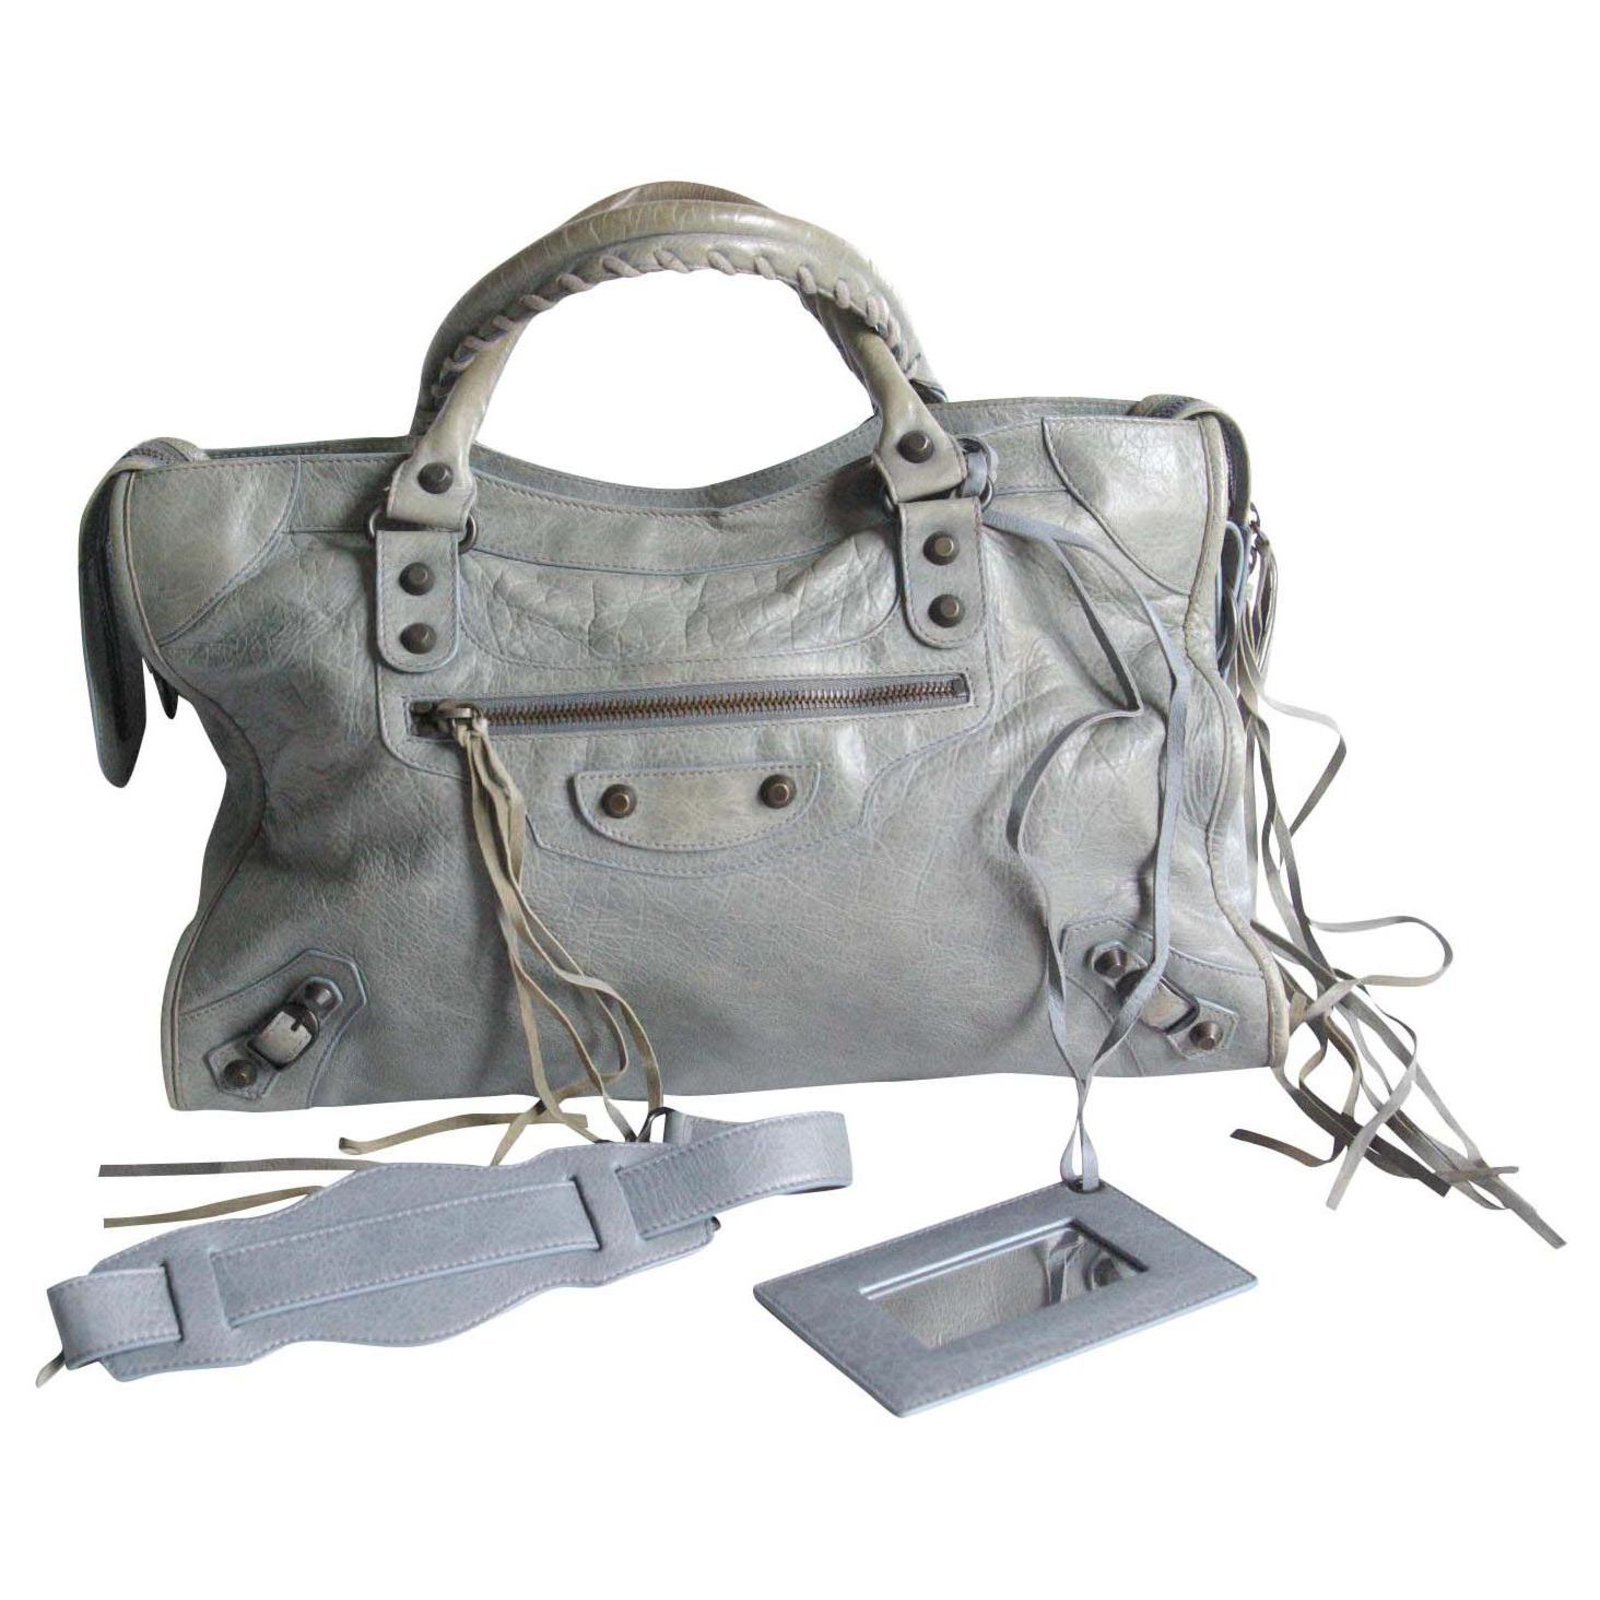 Balenciaga City Motorcycle Bag Grey  Guaranteed Authenticity  Just  Gorgeous Studio  Authentic Bags Only